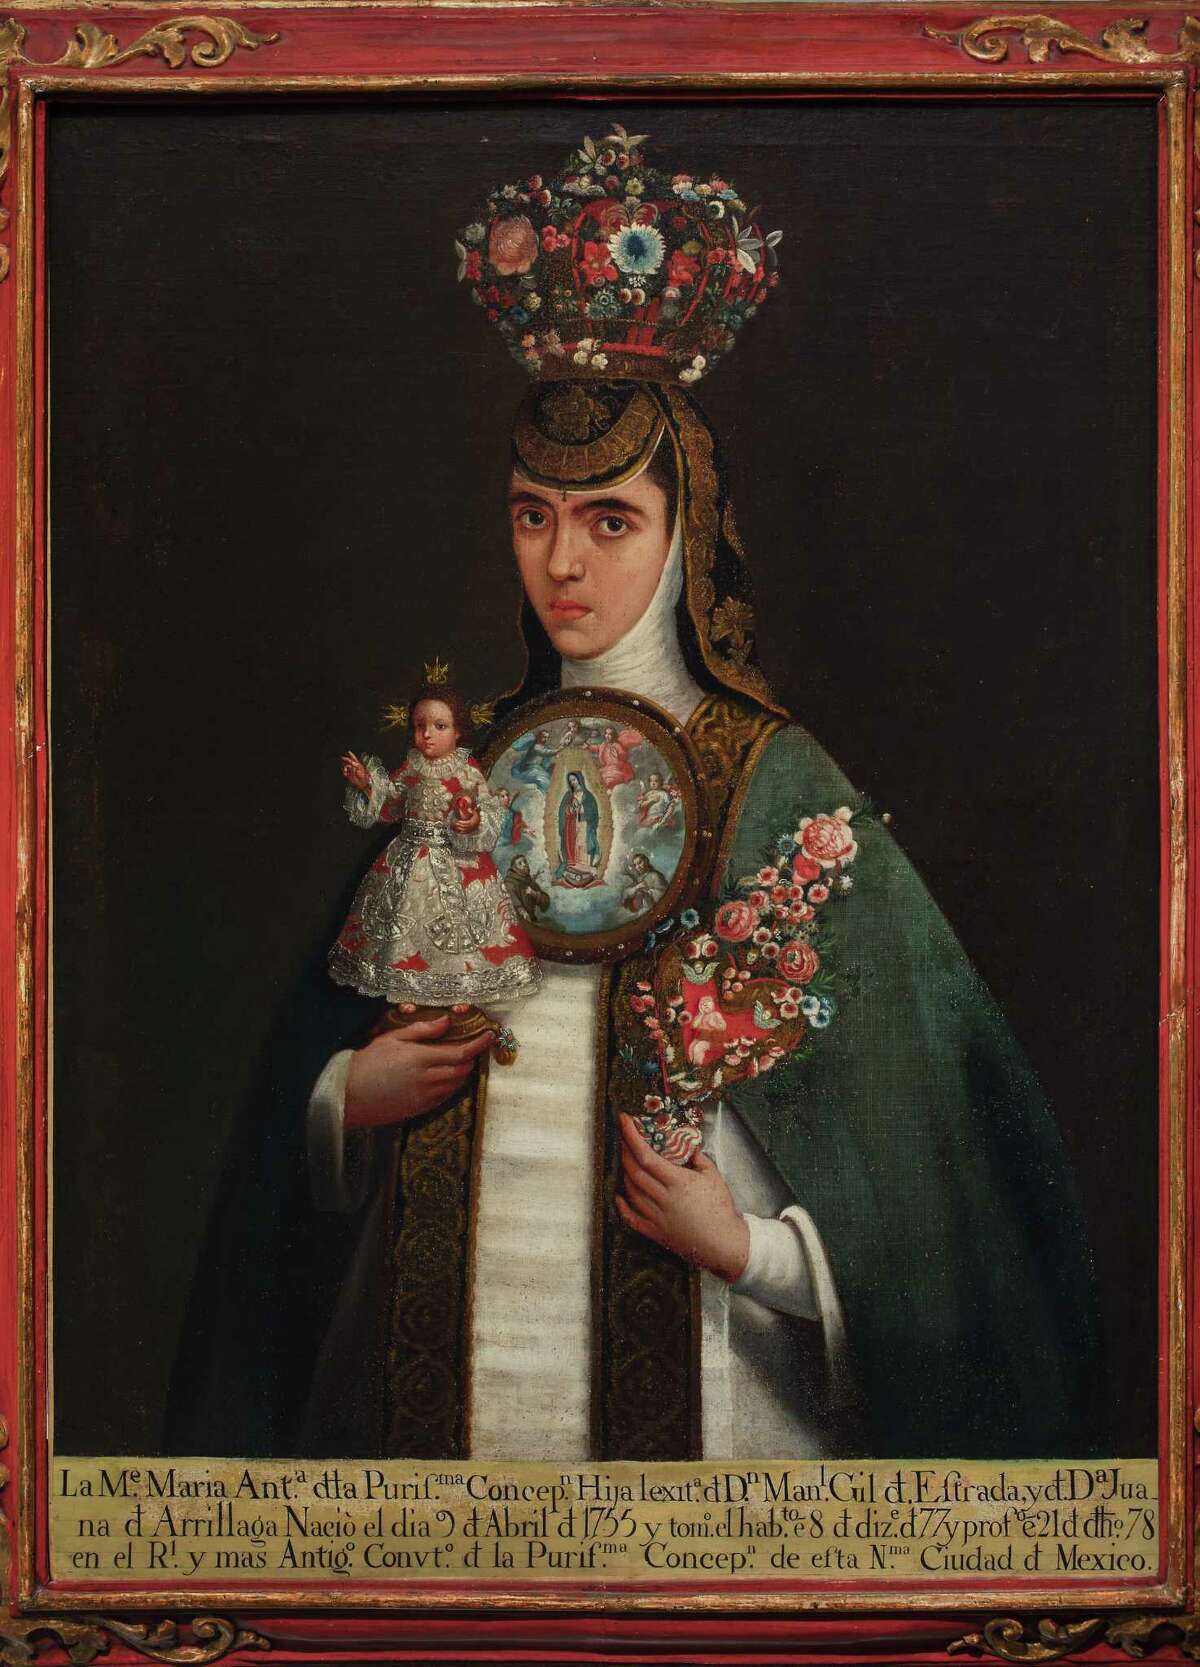 A portrait by an unknown artist of Sister Maria Antonia of the Immaculate Conception, dated to the late 18th century, depicts the moment the young woman began her cloistered life.